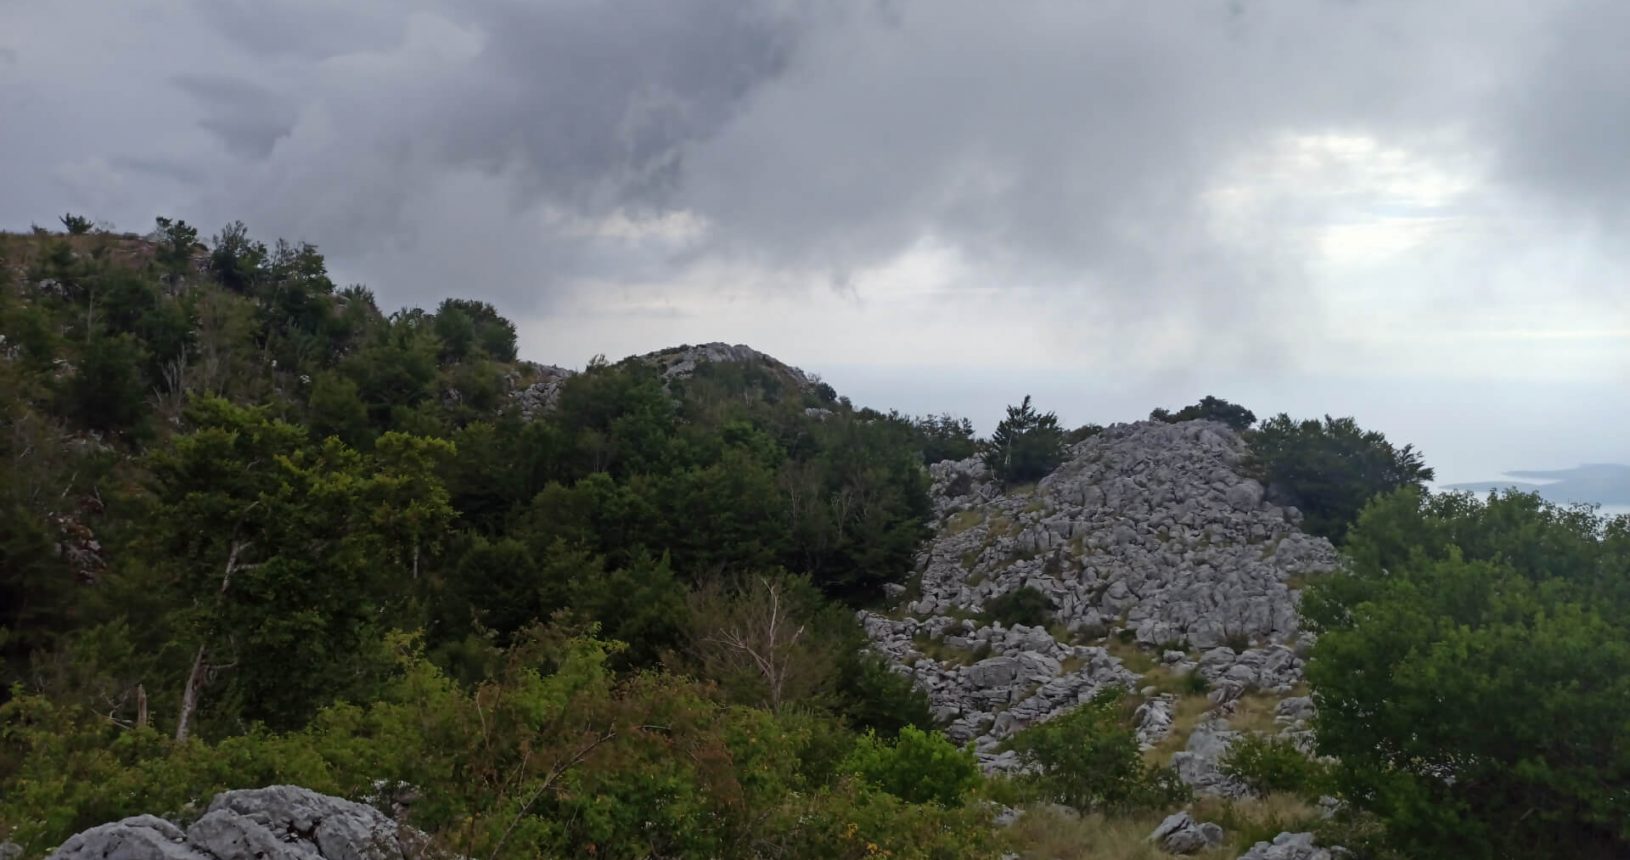 Stony and green sides of the View point for Kotor and Tivat Bay